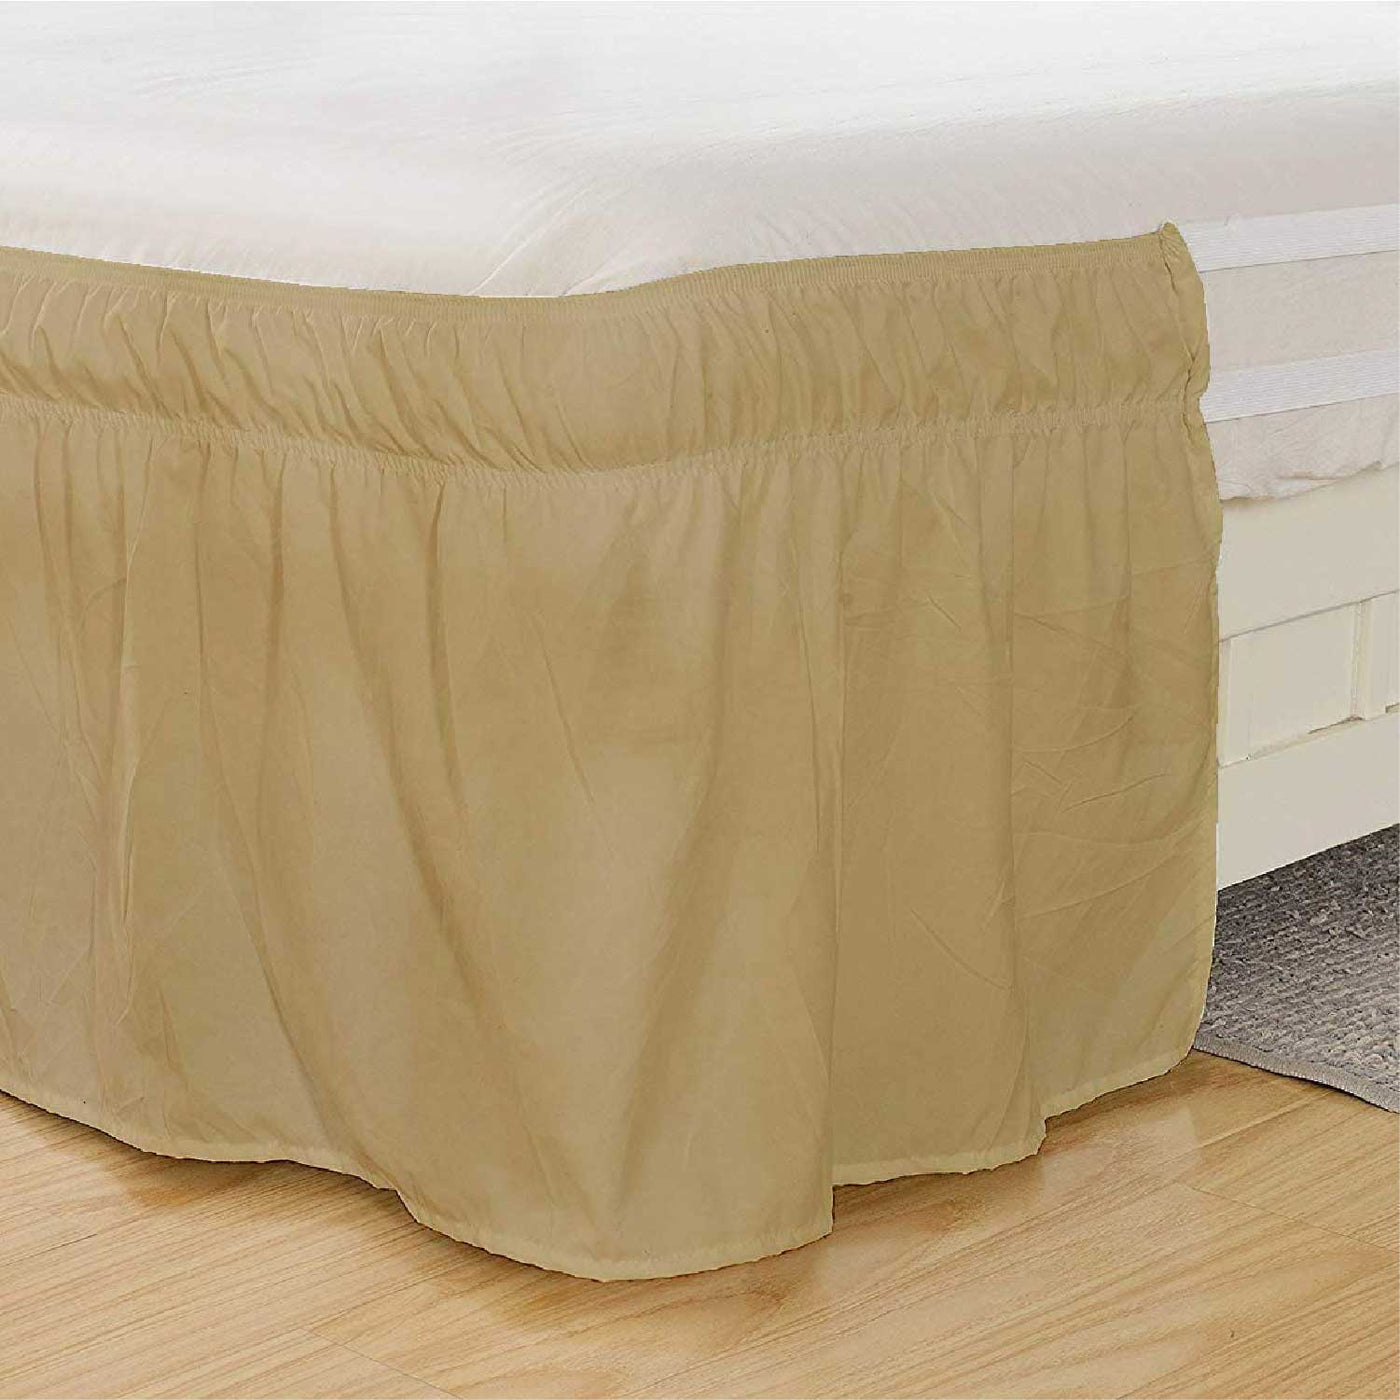 Wrap Around Dust Ruffle Bed Skirt 800 Thread Count 100% Egyptian Cotton